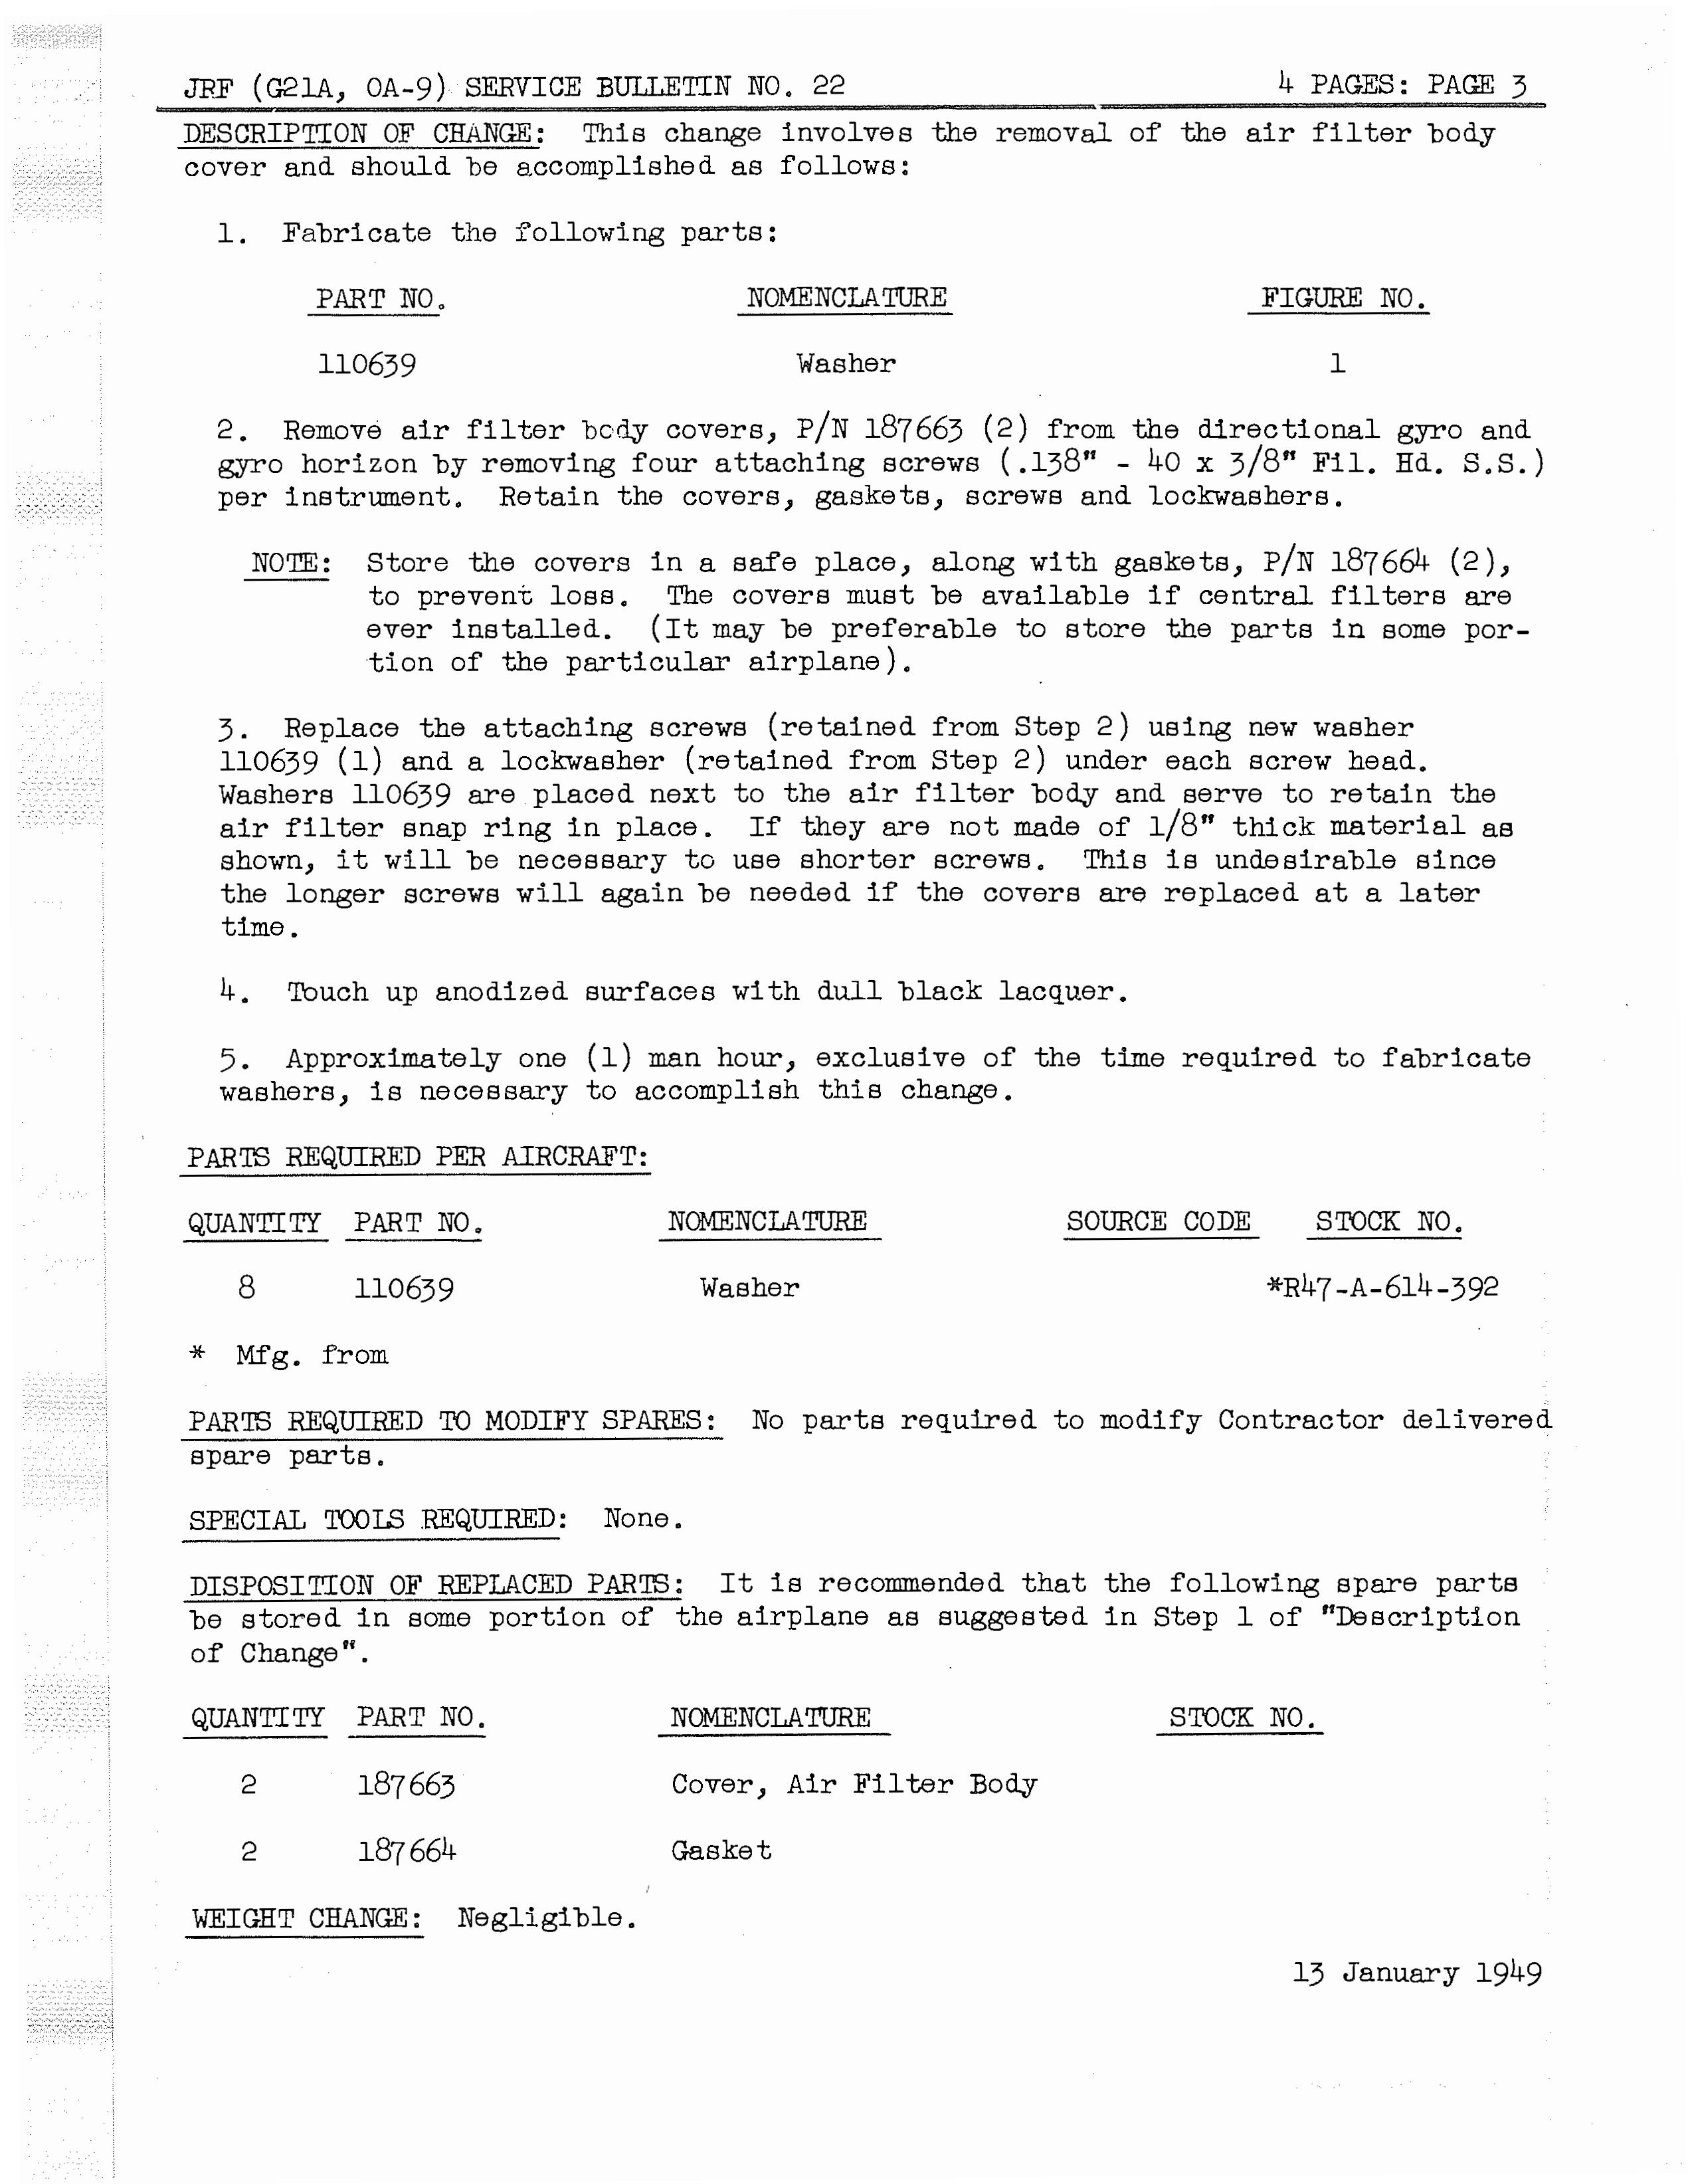 Sample page 5 from AirCorps Library document: Removal of Furnishings, Cover, Gyro Horizon Indicator and Directional Gyro Air Filter Body for JRF Aircraft